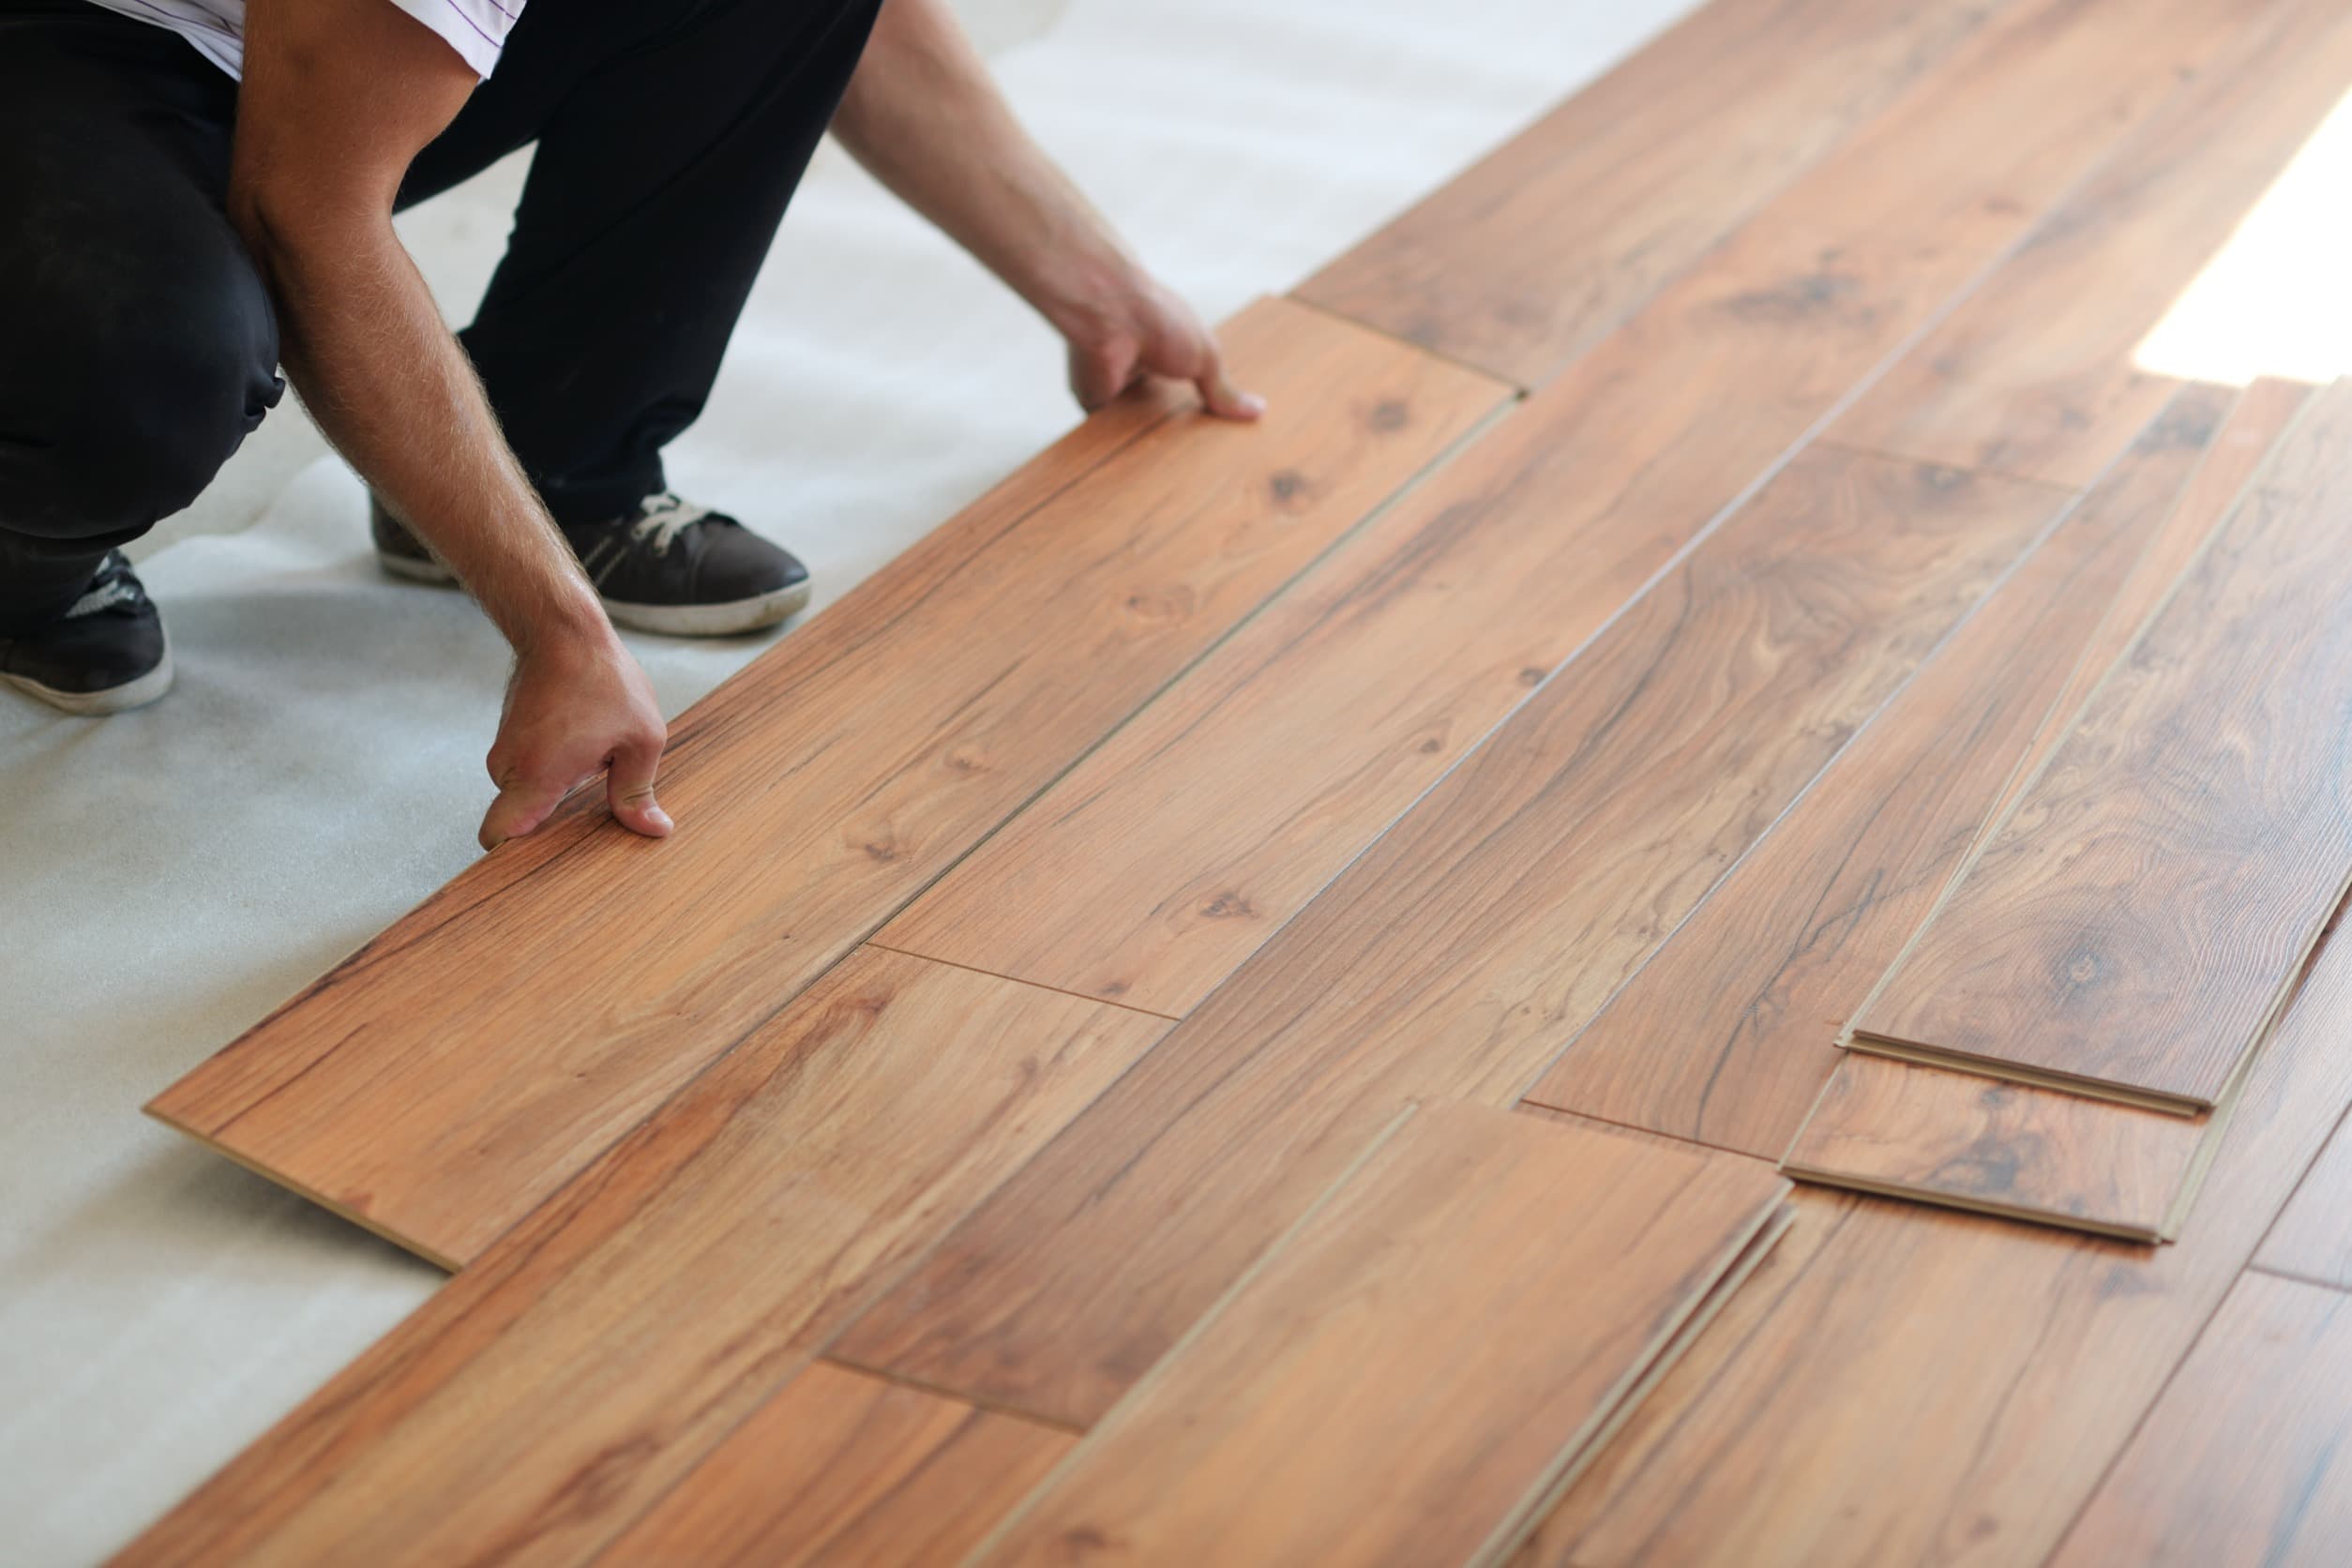 Diy Laminate Floor Installation Extreme How To